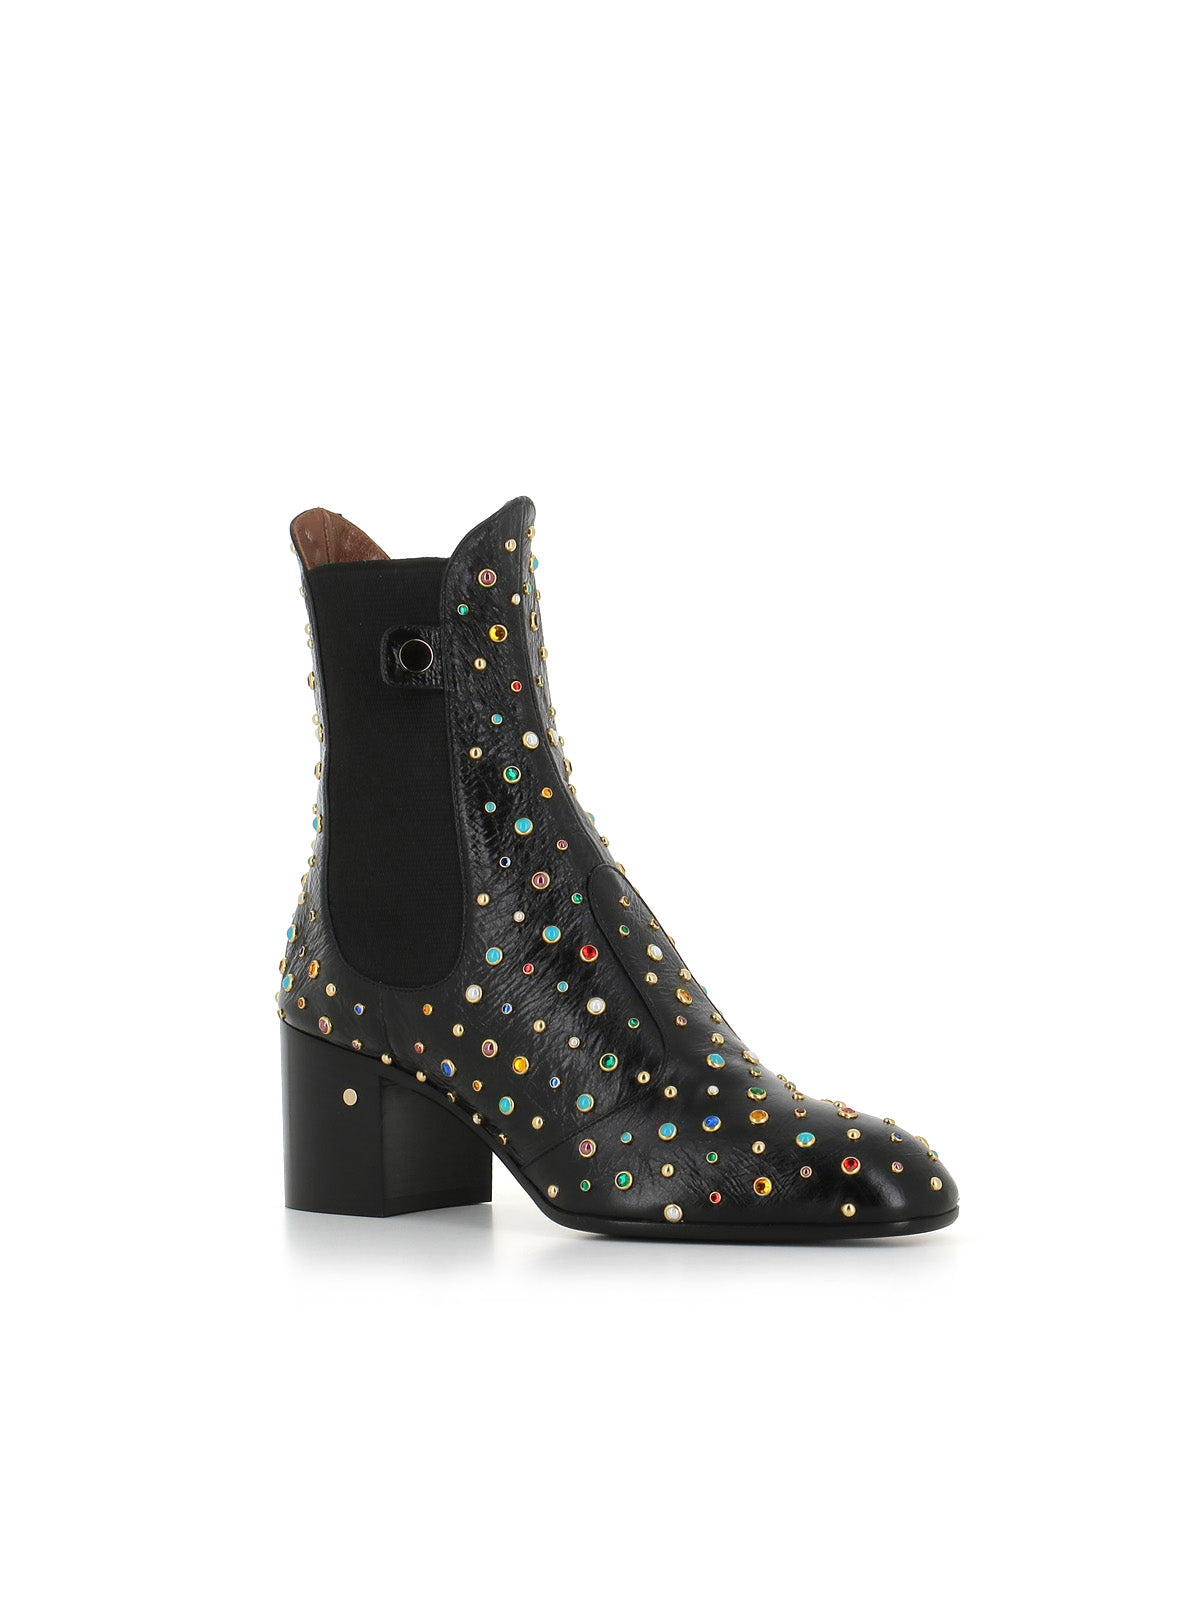  Laurence Dacade Stivaletto Angie Multicolor Studs Nero Donna - 3